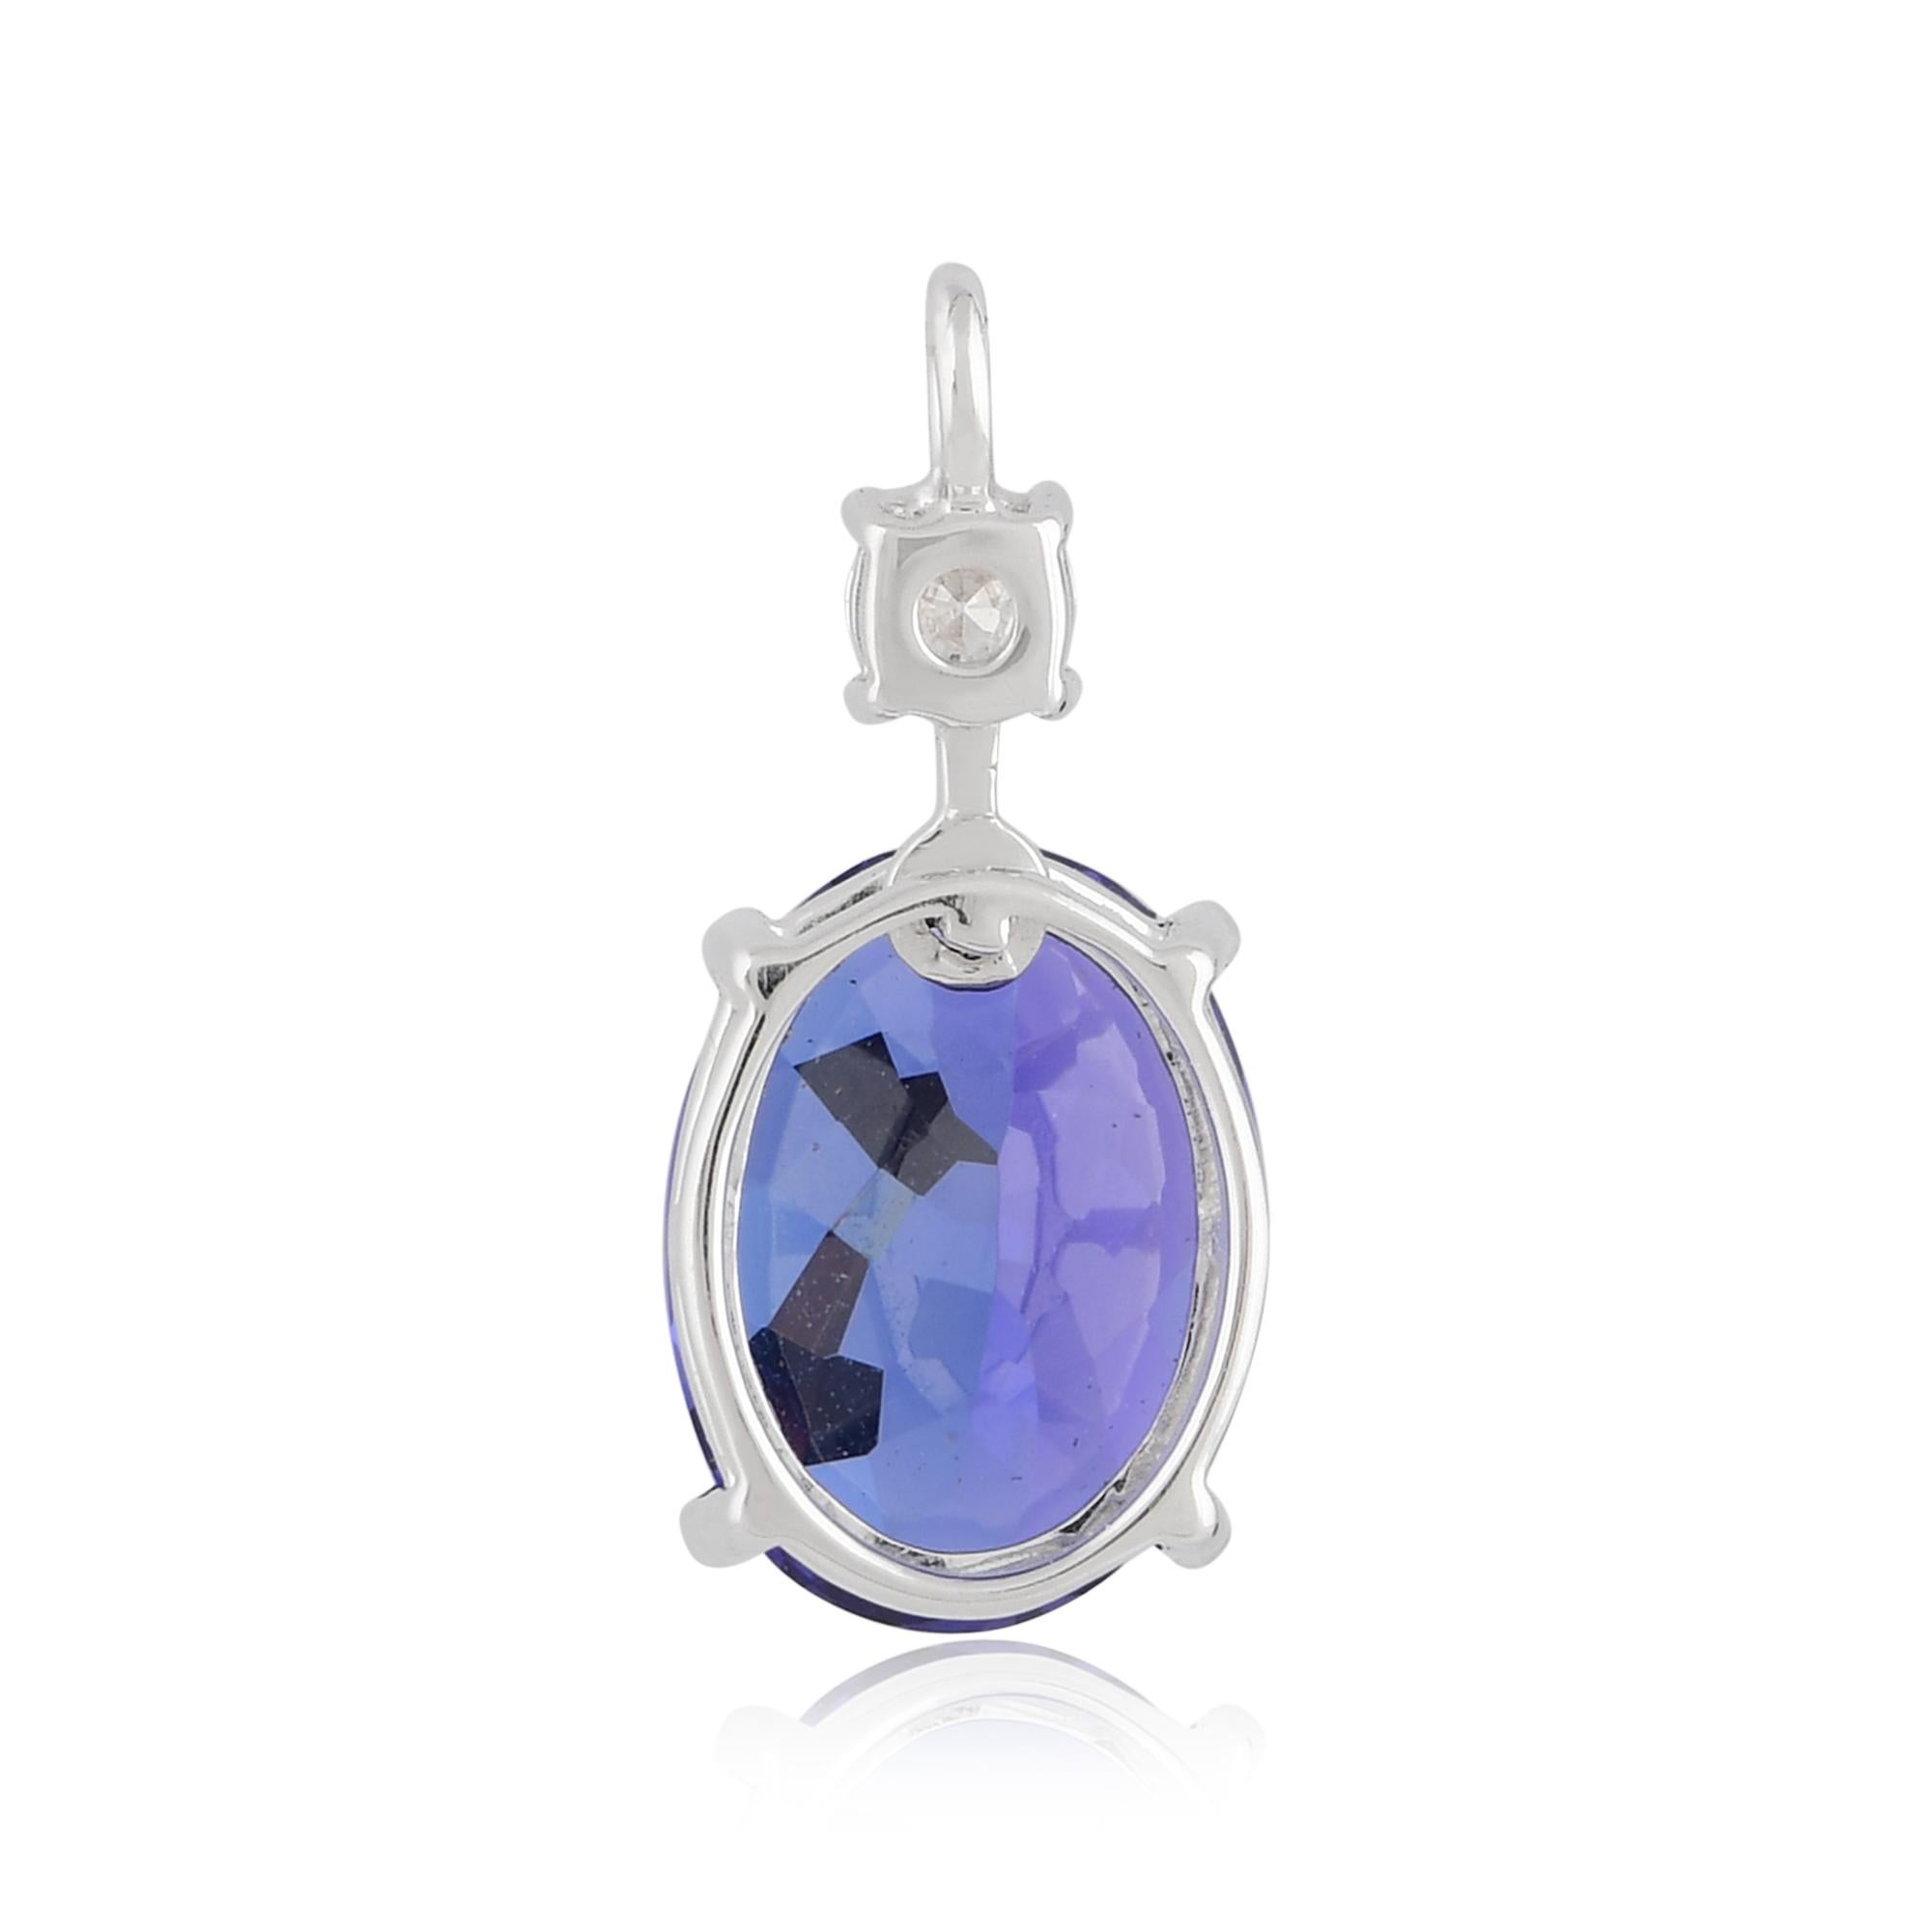 Crafted in 18 karat white gold, the pendant's setting enhances the beauty of the Tanzanite and diamonds. White gold's timeless appeal and lustrous finish create a perfect backdrop, showcasing the gemstones' brilliance and adding a touch of refined